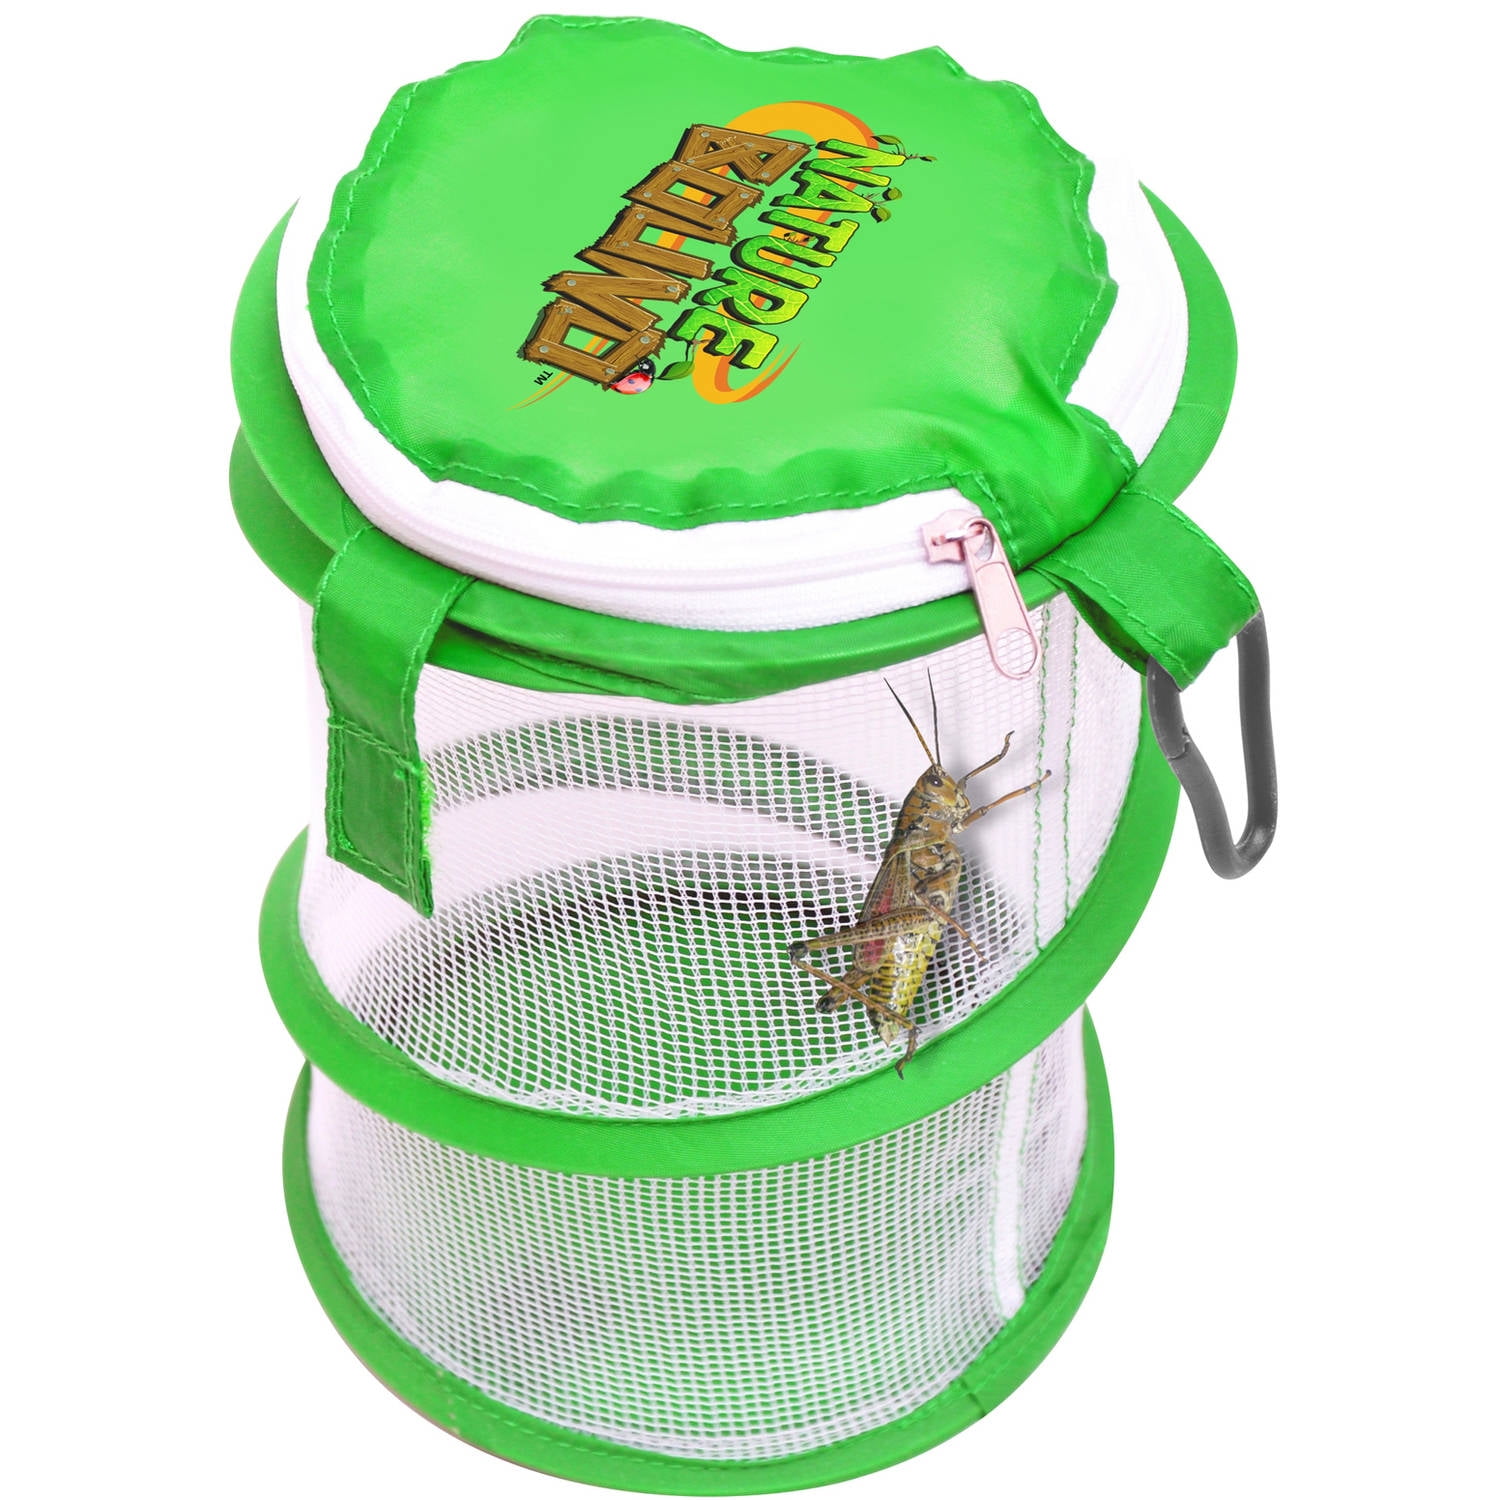 Toysmith Critter Case Outdoor Education Discovery Backyard Insect Exploration 